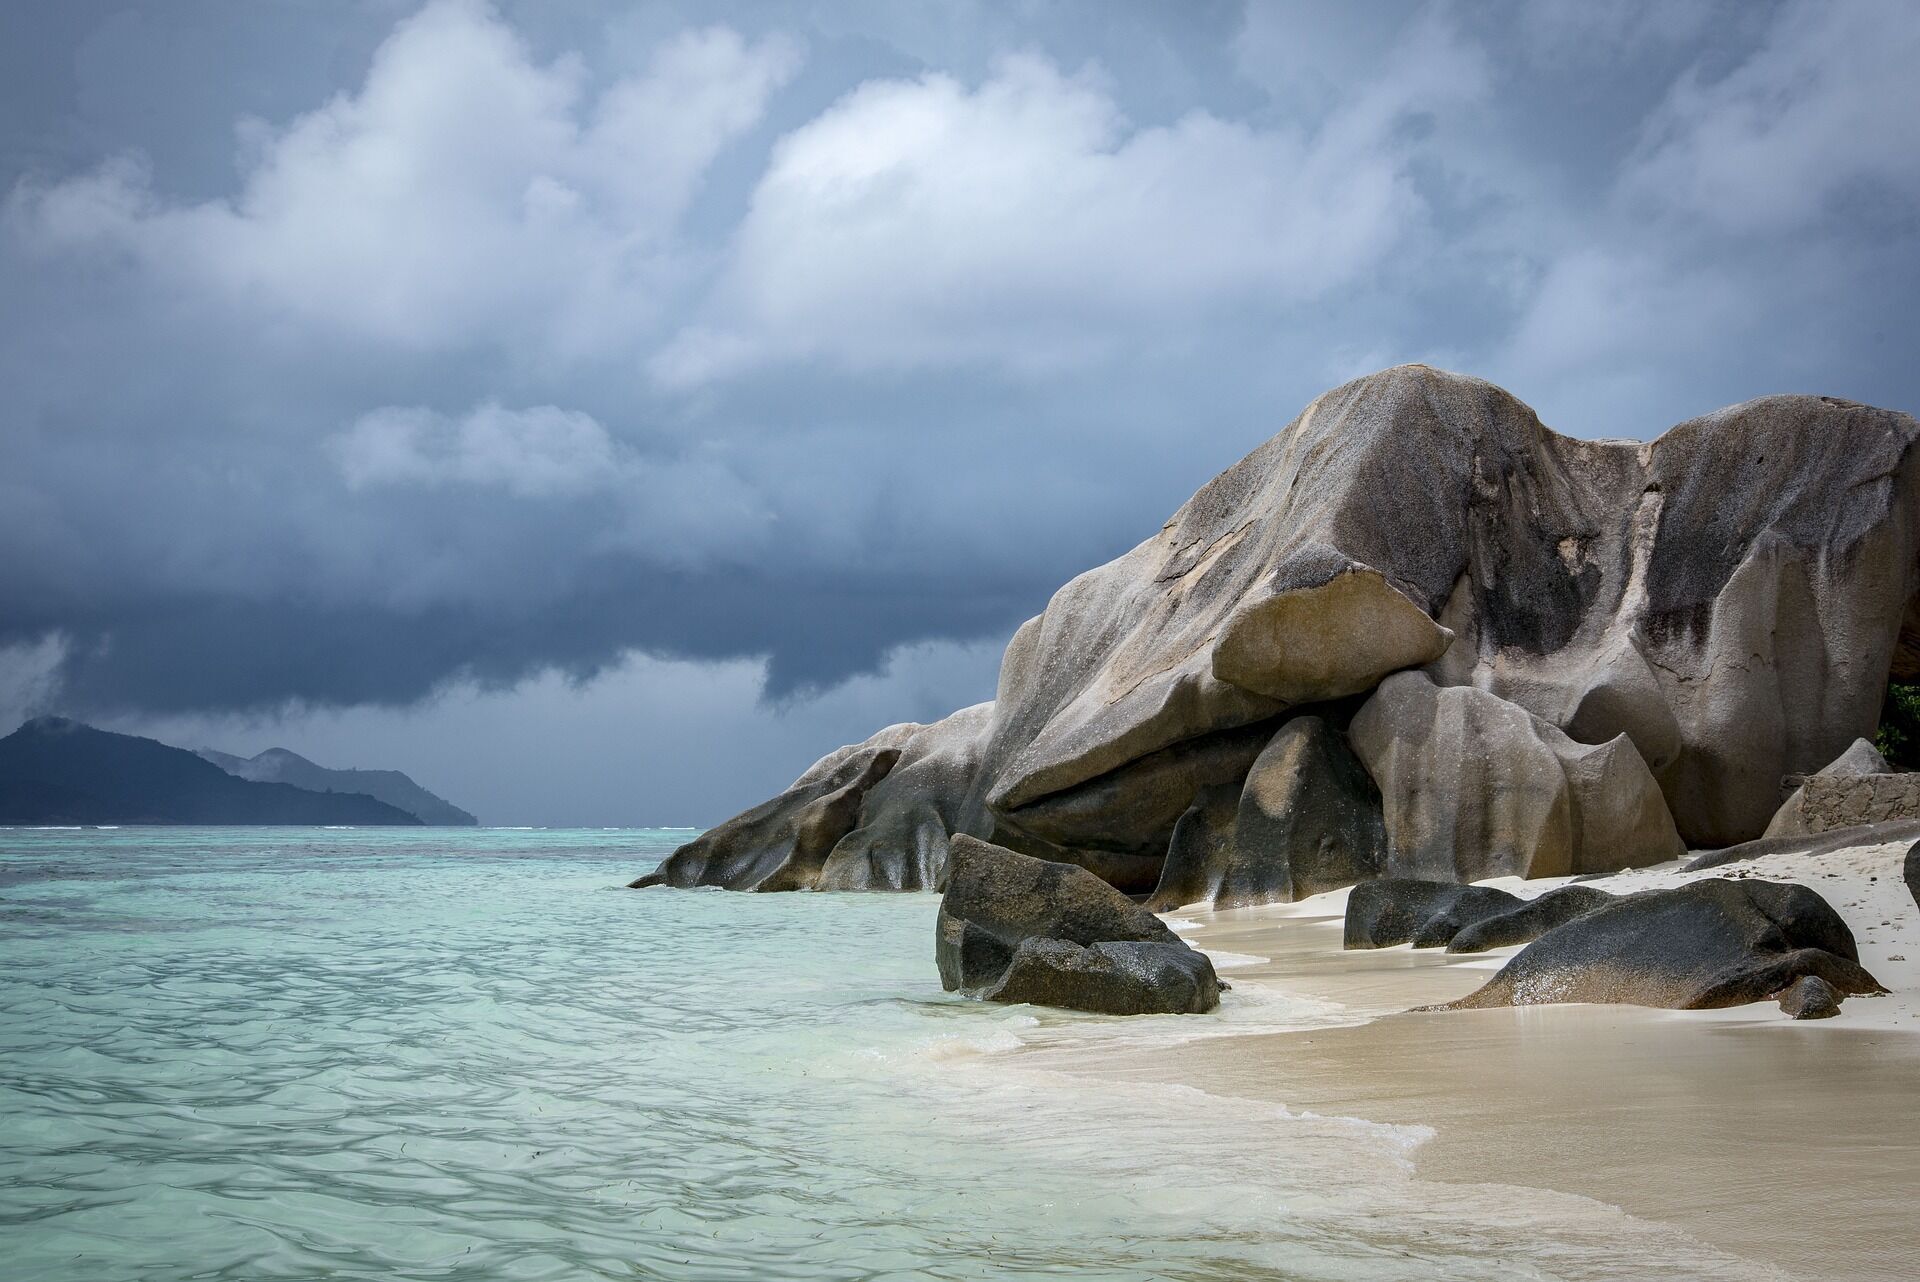 Island vacation: when to go on a trip to the Seychelles